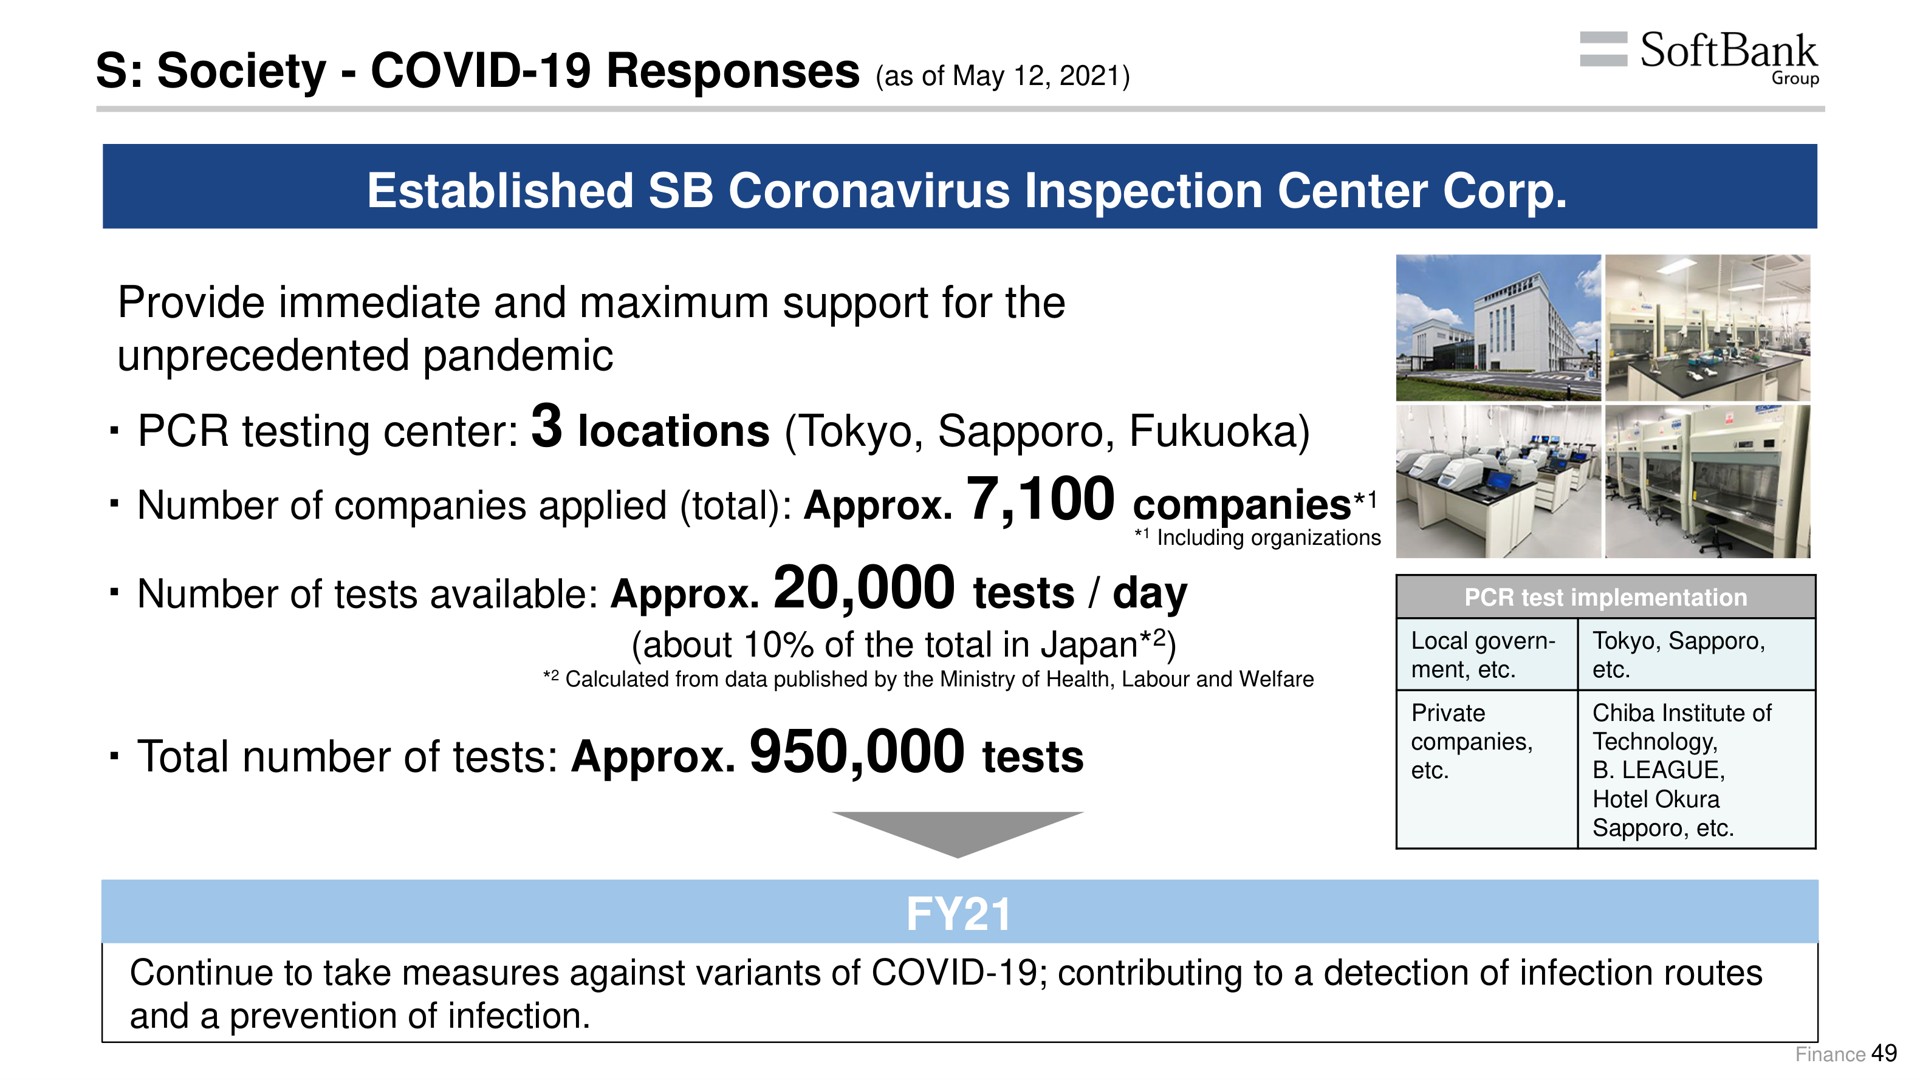 society covid responses as of may established inspection center corp provide immediate and maximum support for the unprecedented pandemic testing center locations number of companies applied total companies number of tests available tests day total number of tests tests a league | SoftBank